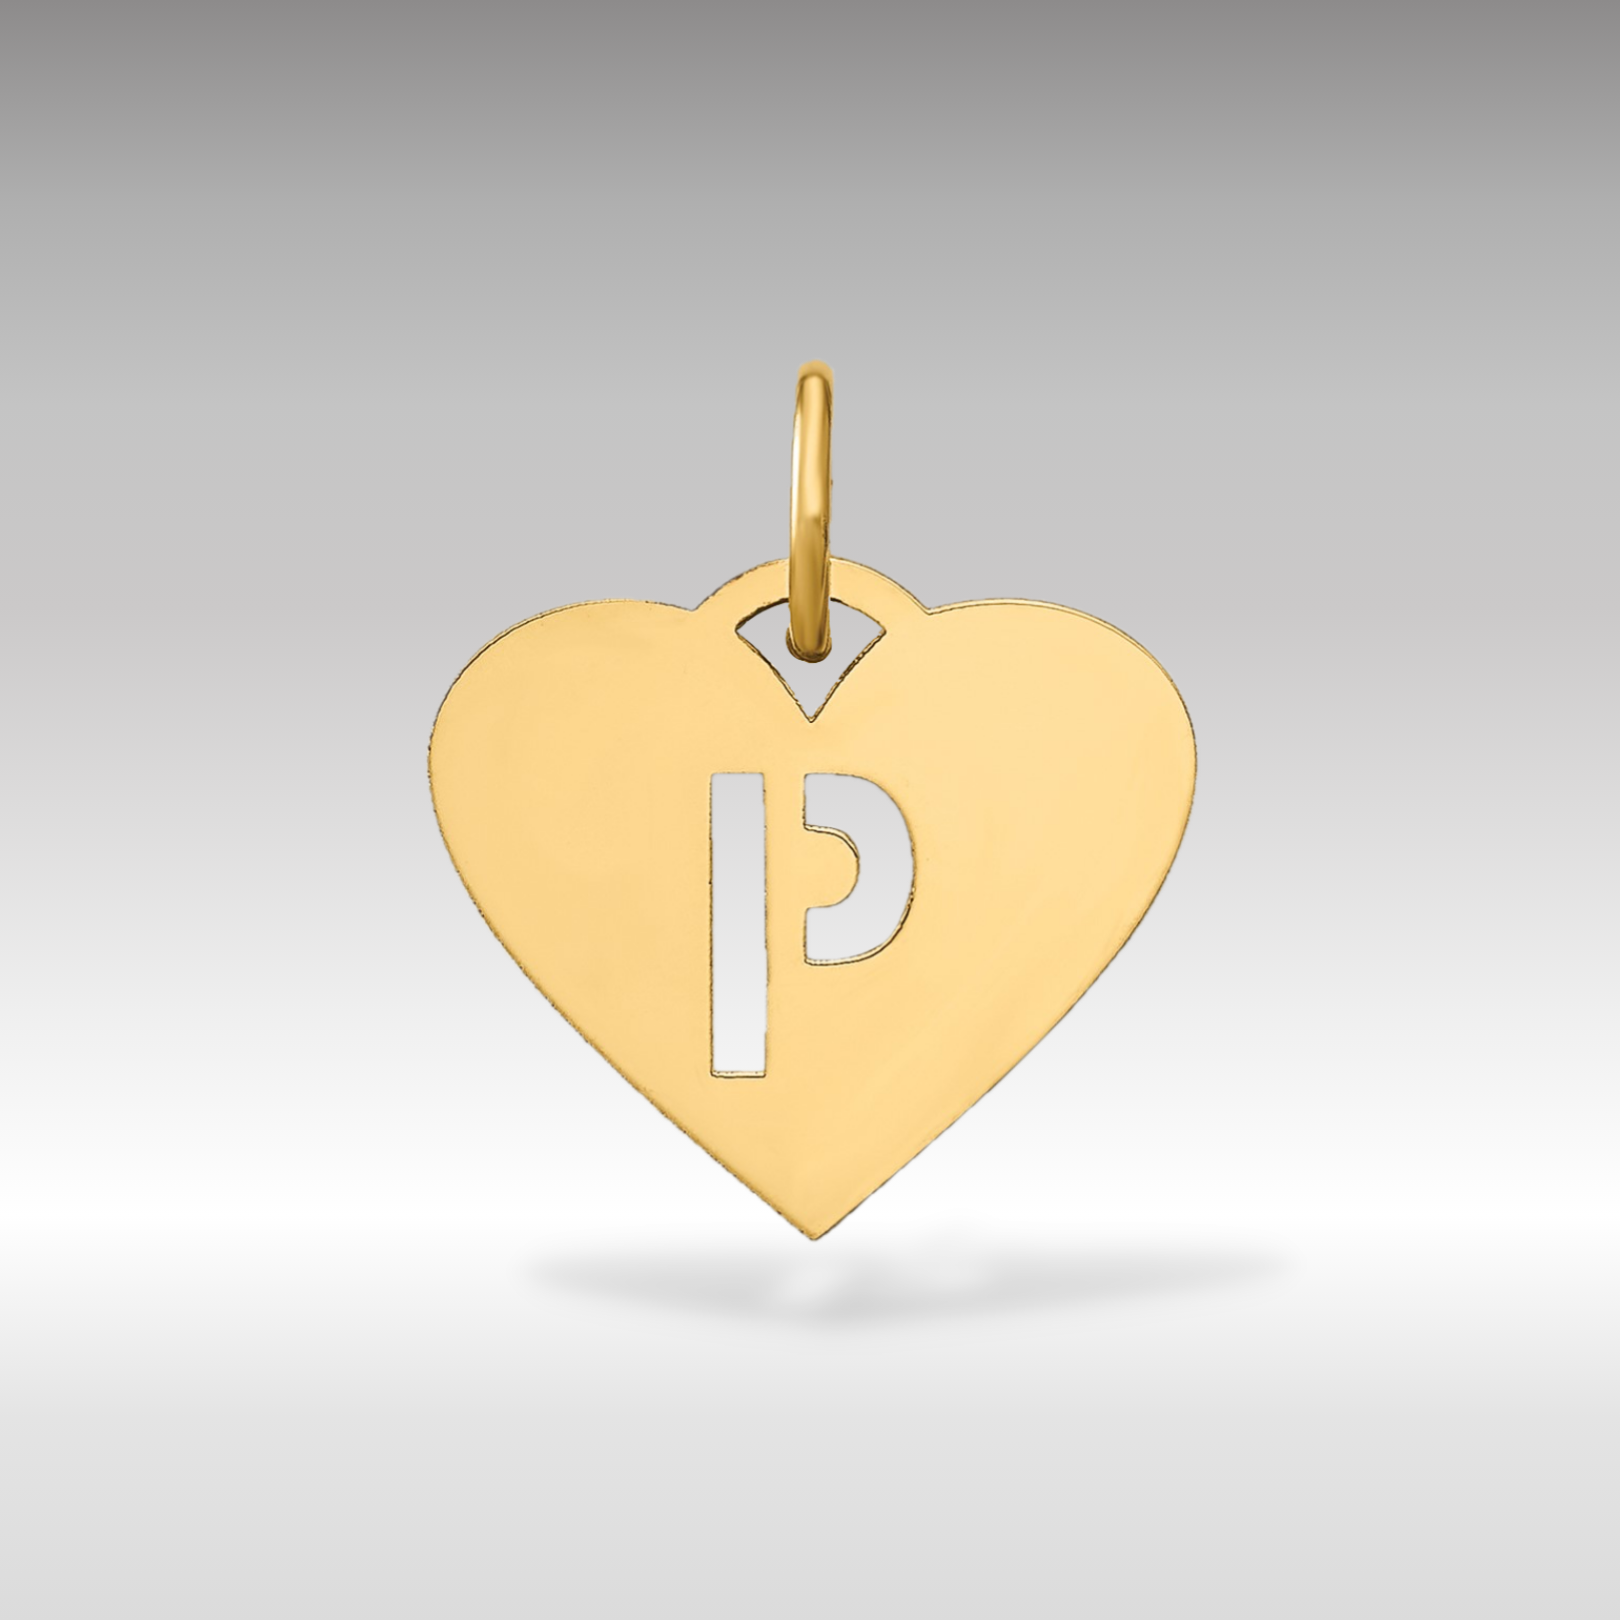 14K Gold Heart Pendant with Letter 'P' - Charlie & Co. Jewelry